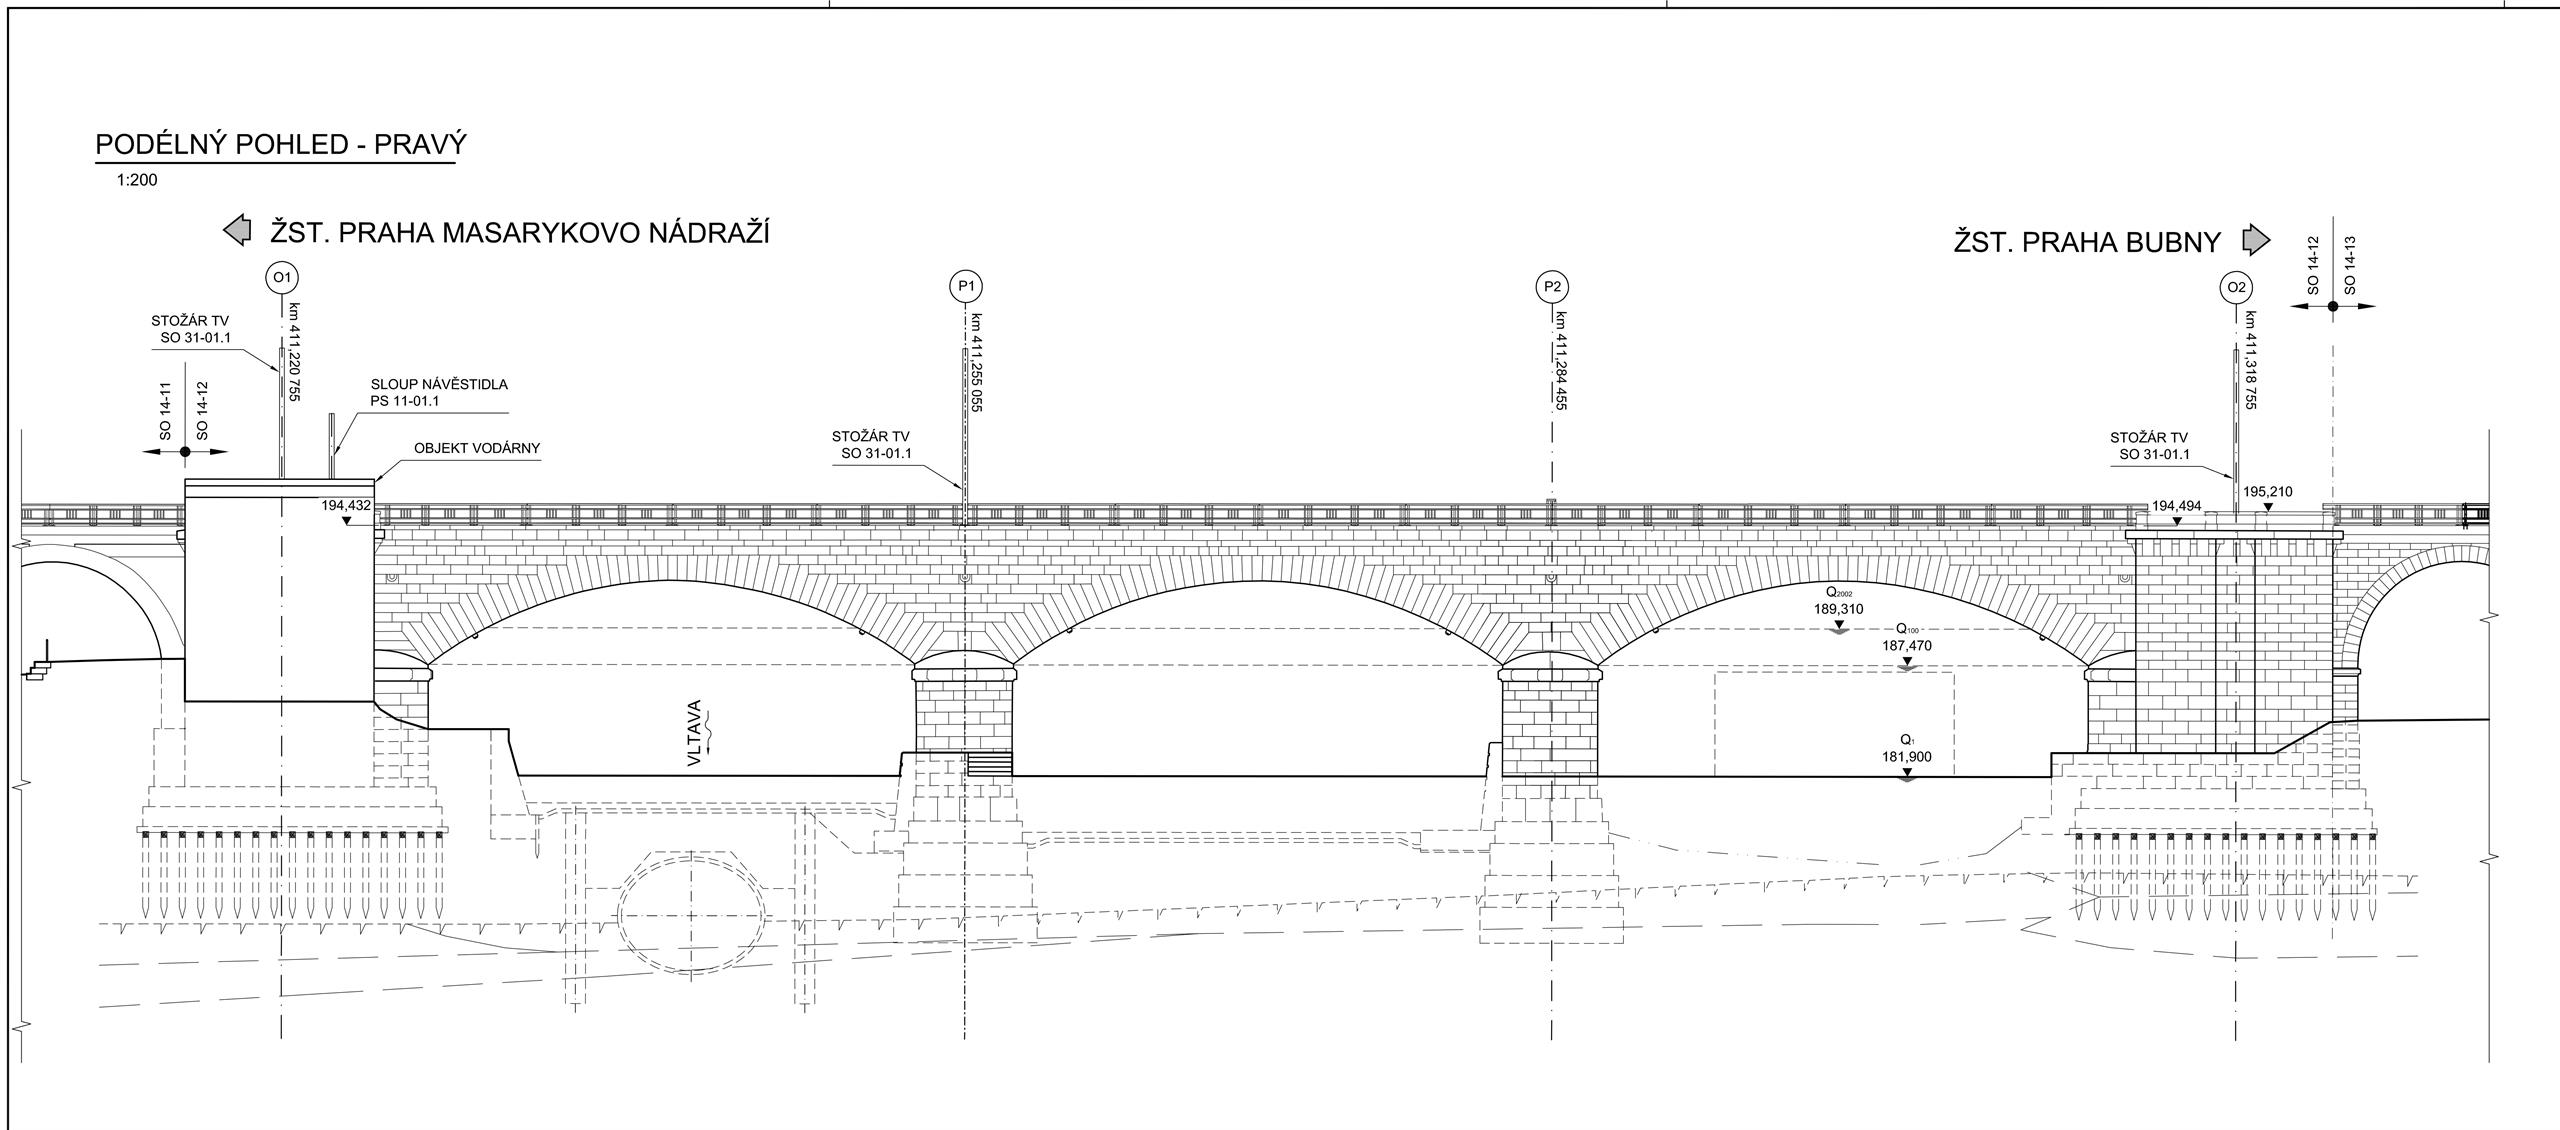 Detailed drawing of the viaduct